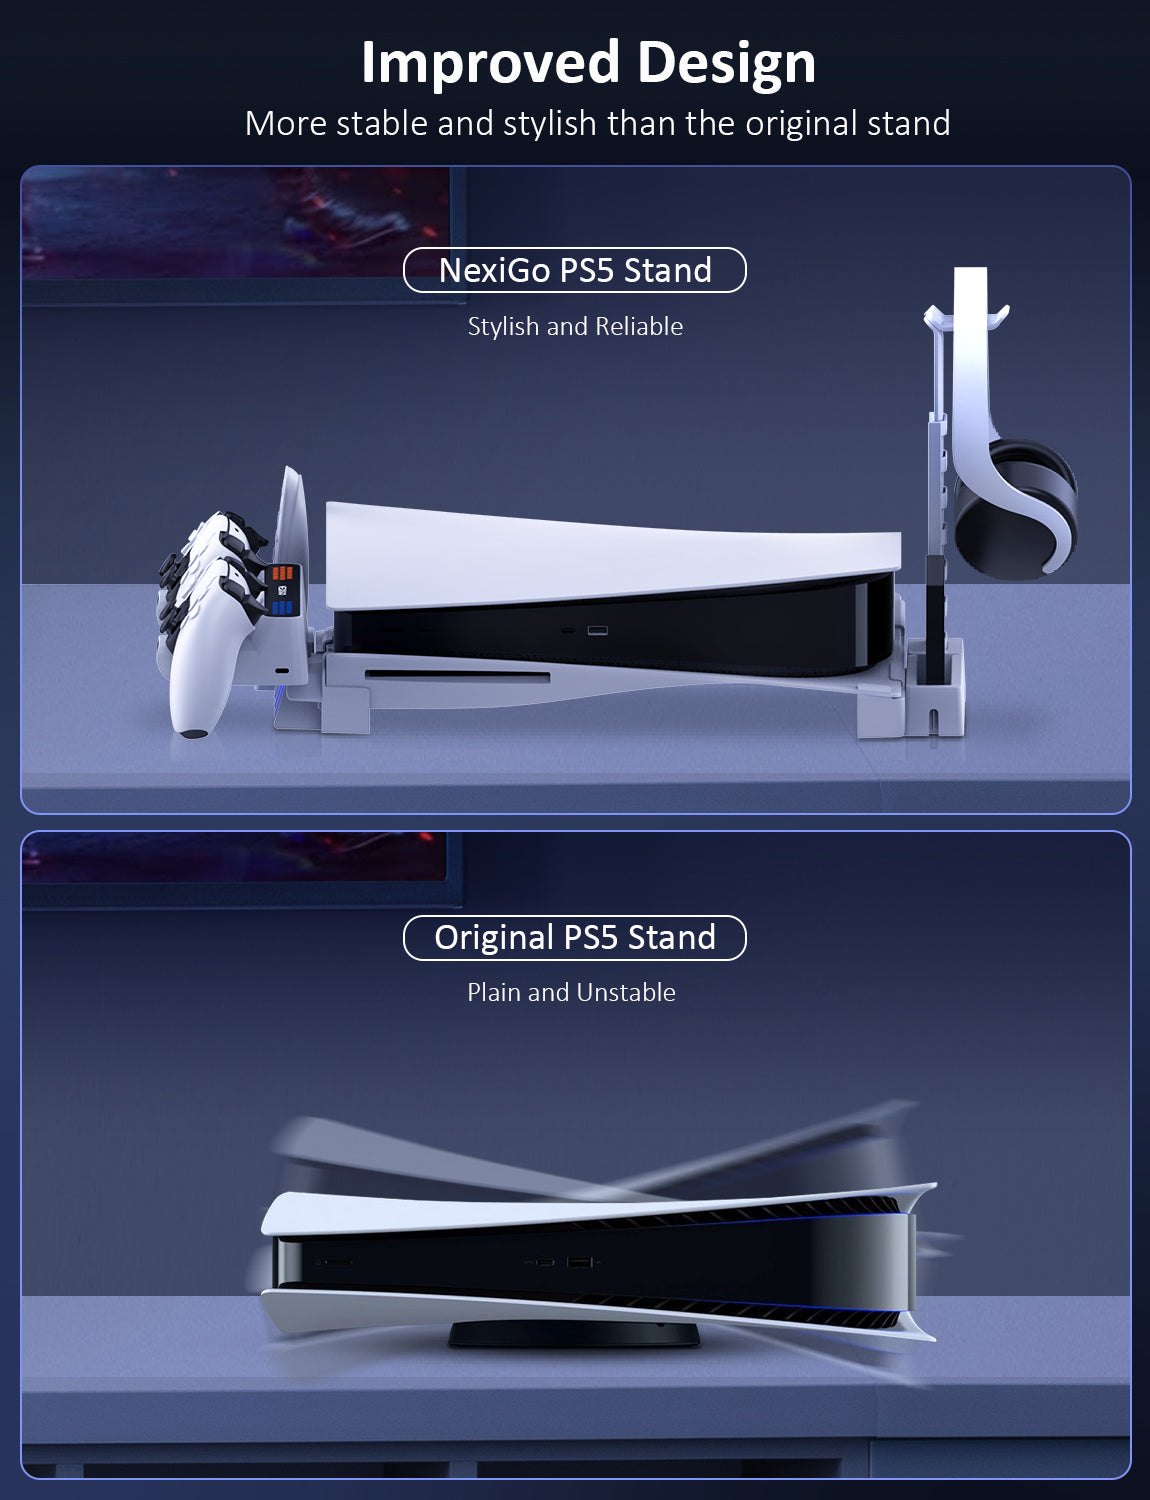 PS5 stand wobbles, but not with Modular System—sturdy and stable setup. 